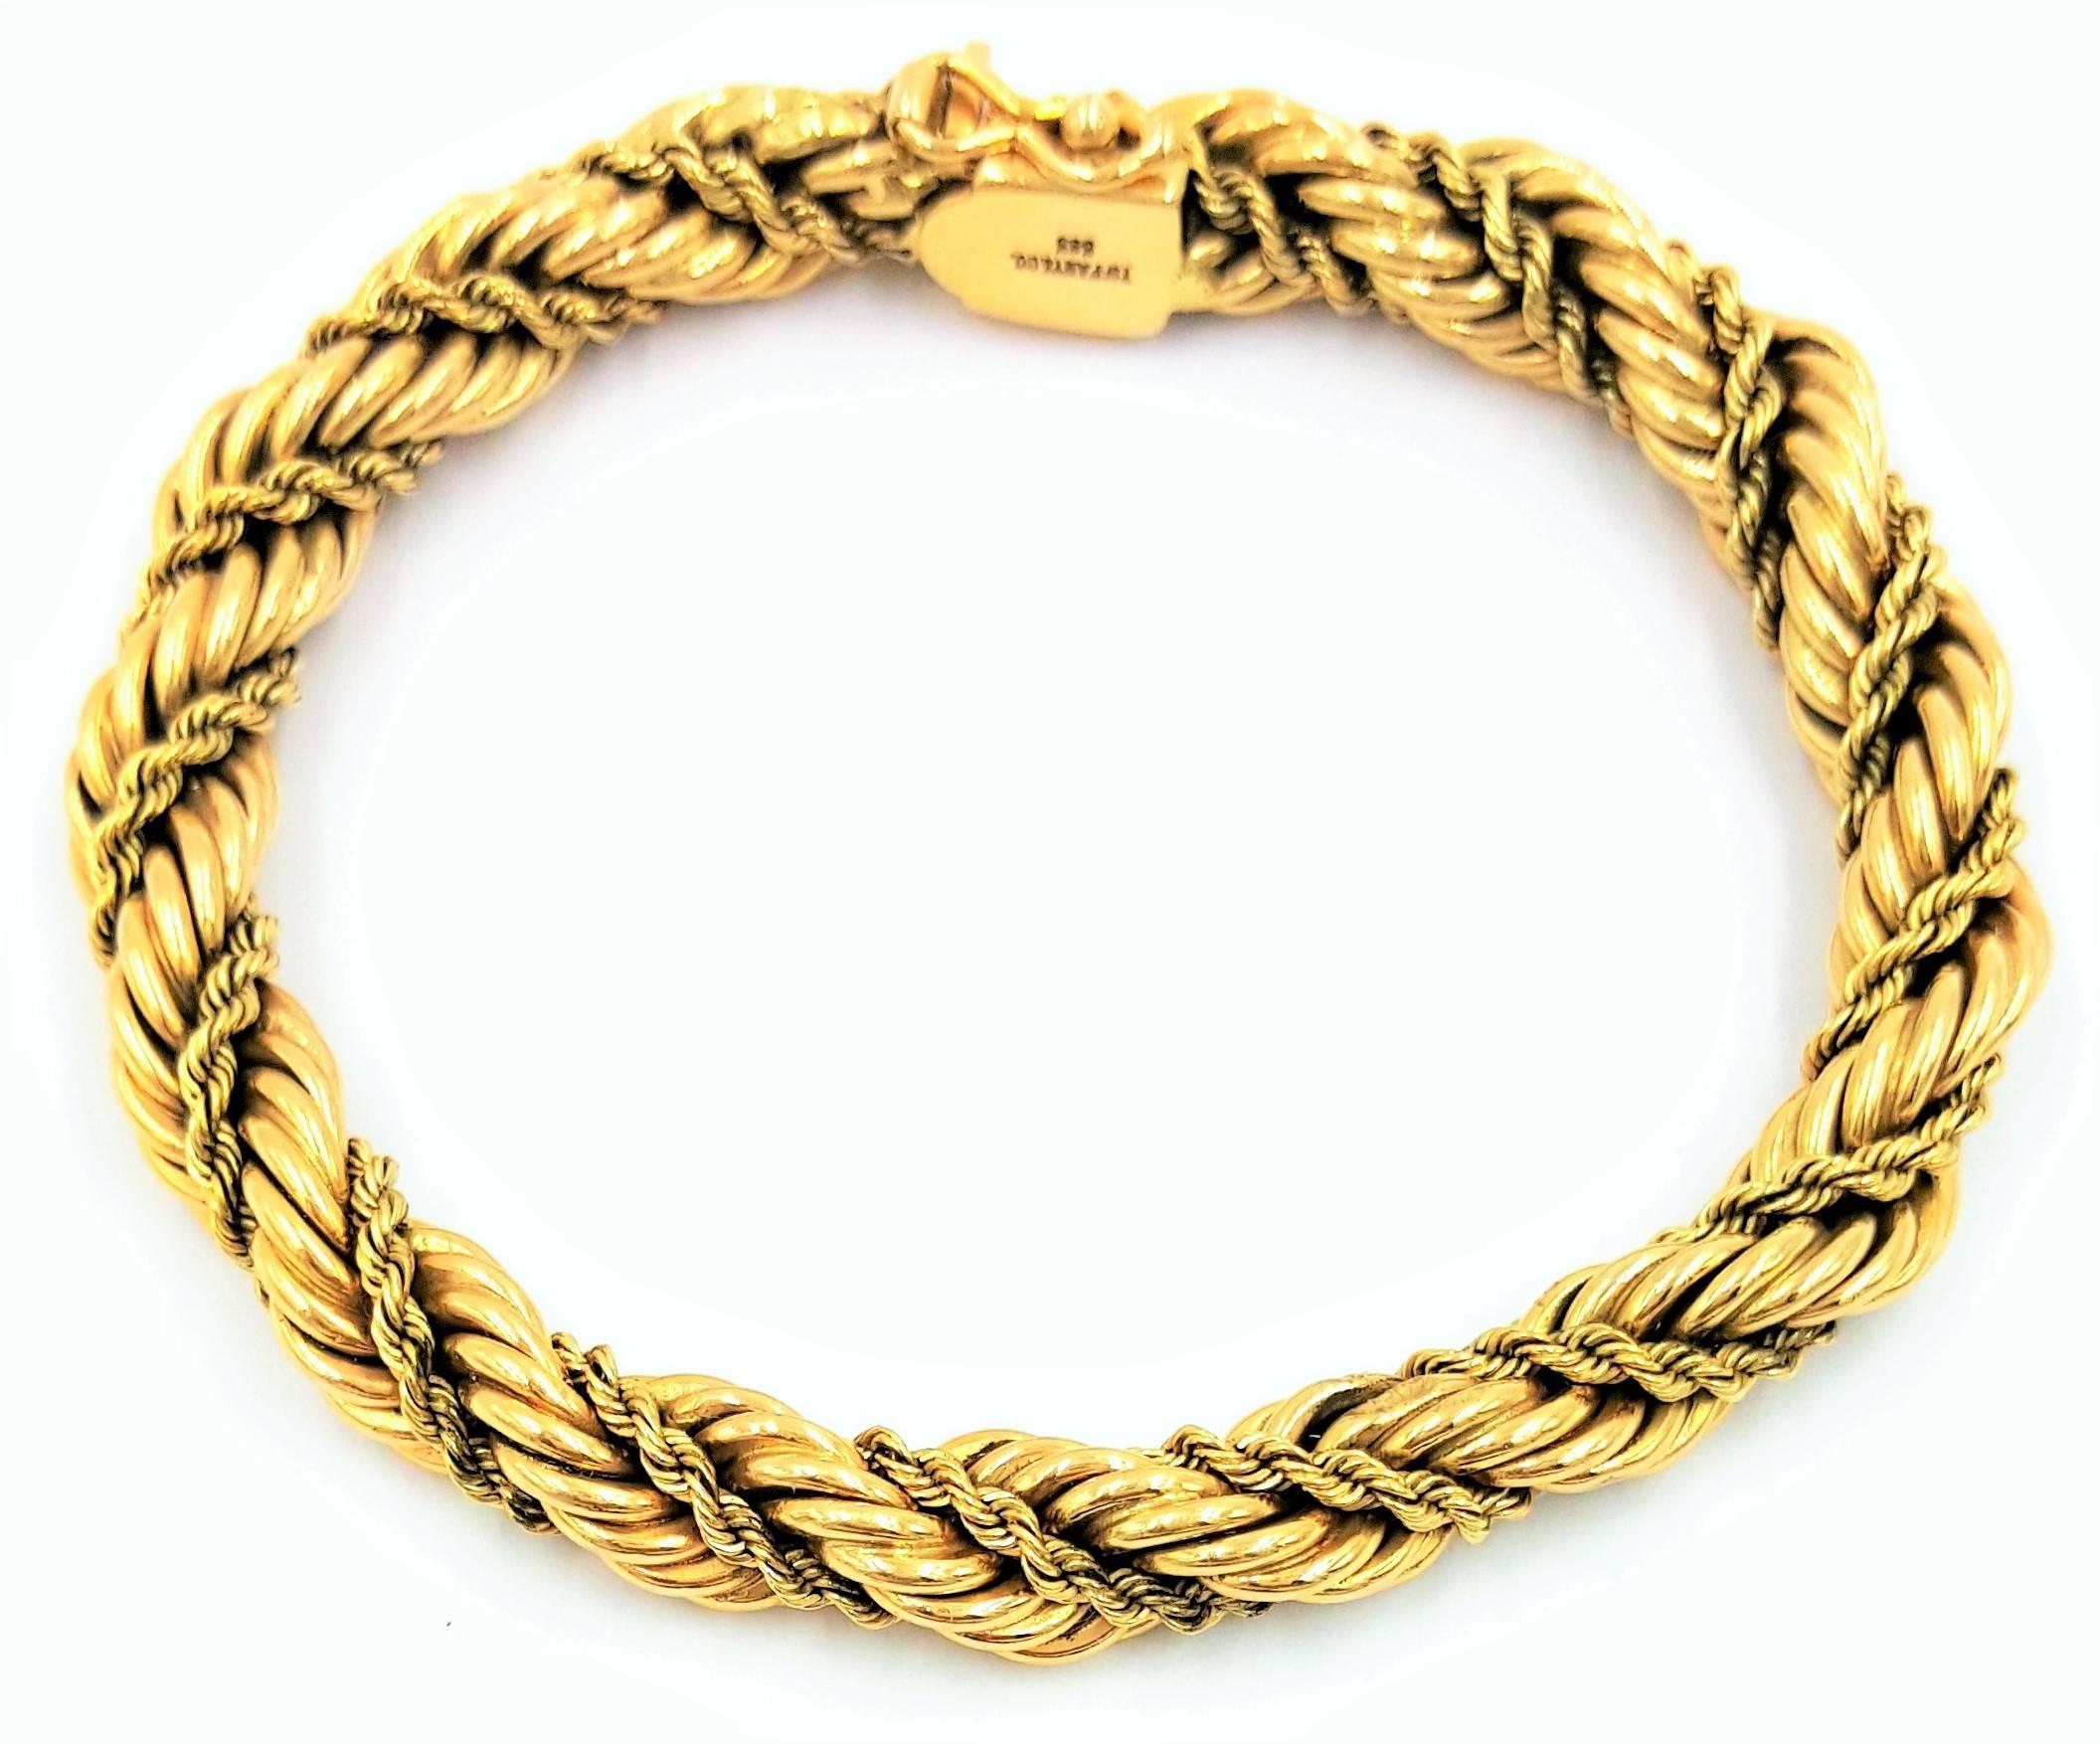 Contemporary Tiffany & Co. Golden Light Collection Twisted Gold Rope Bracelet For Sale